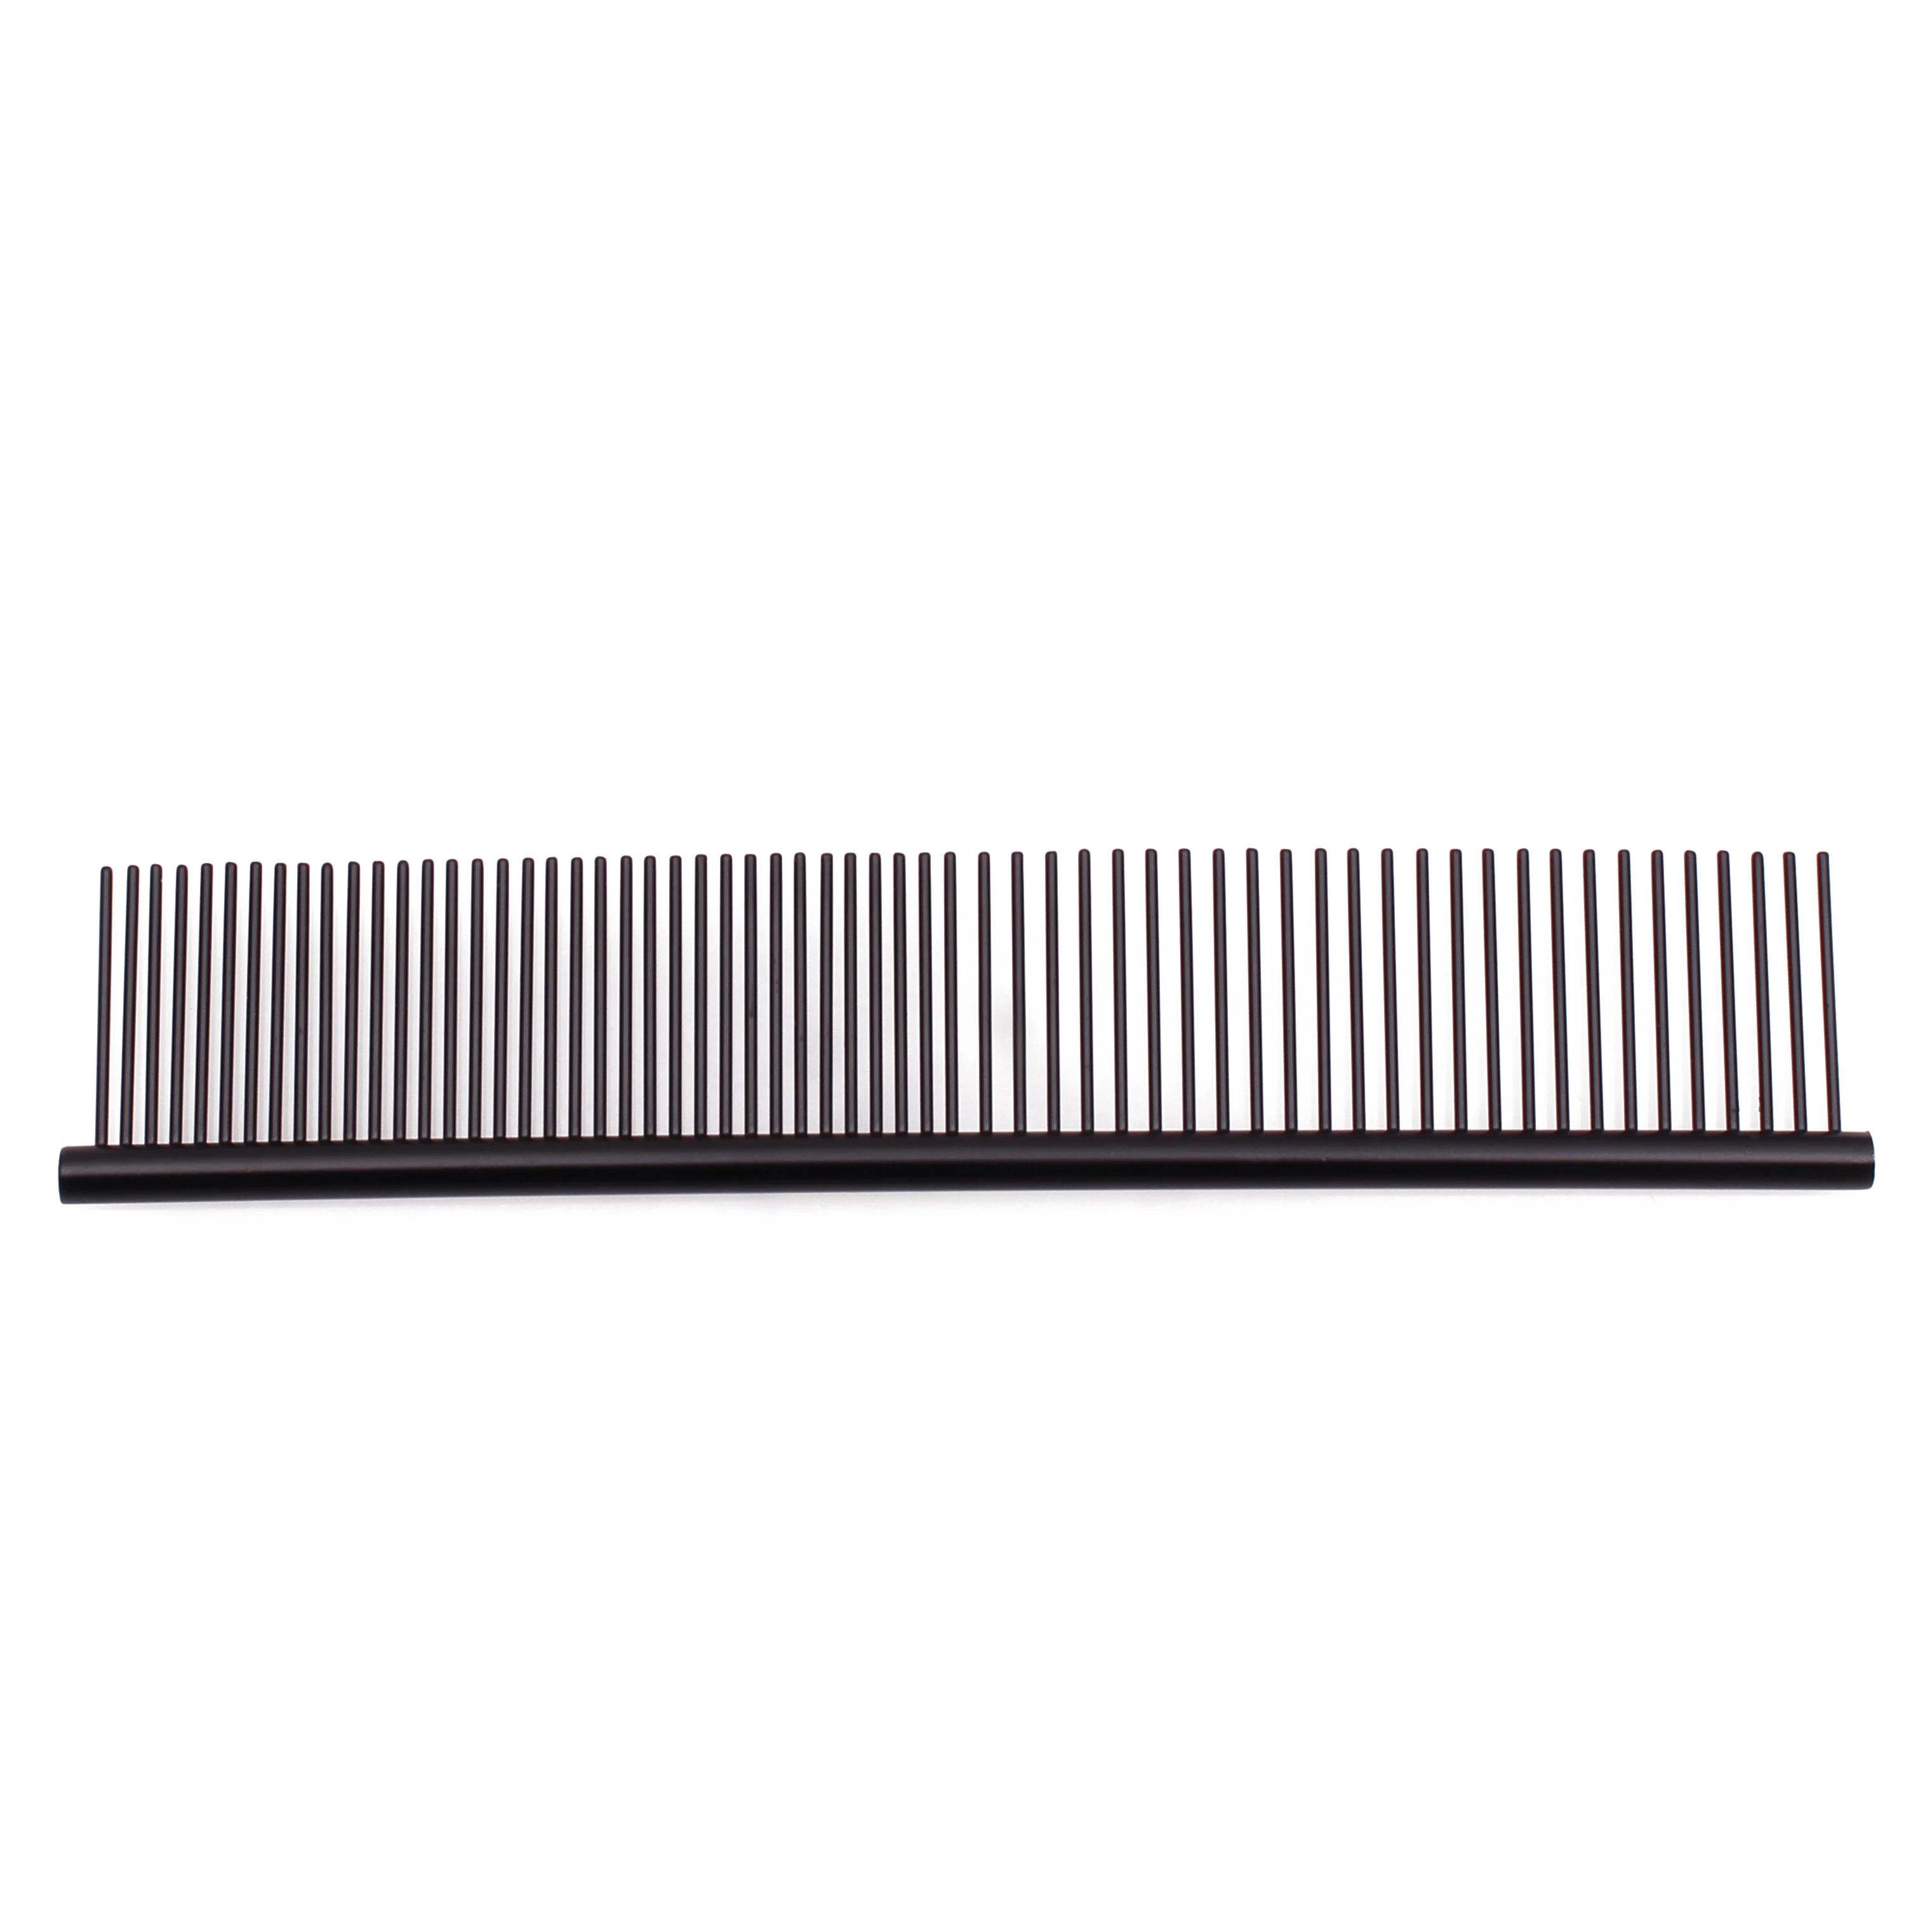 

Black Color Stainless Steel Dog Grooming Comb Row Teeth Needle Hair Trimmer Cat Pet Grooming Massage Comb Wide Tooth C6703-1, Customized color